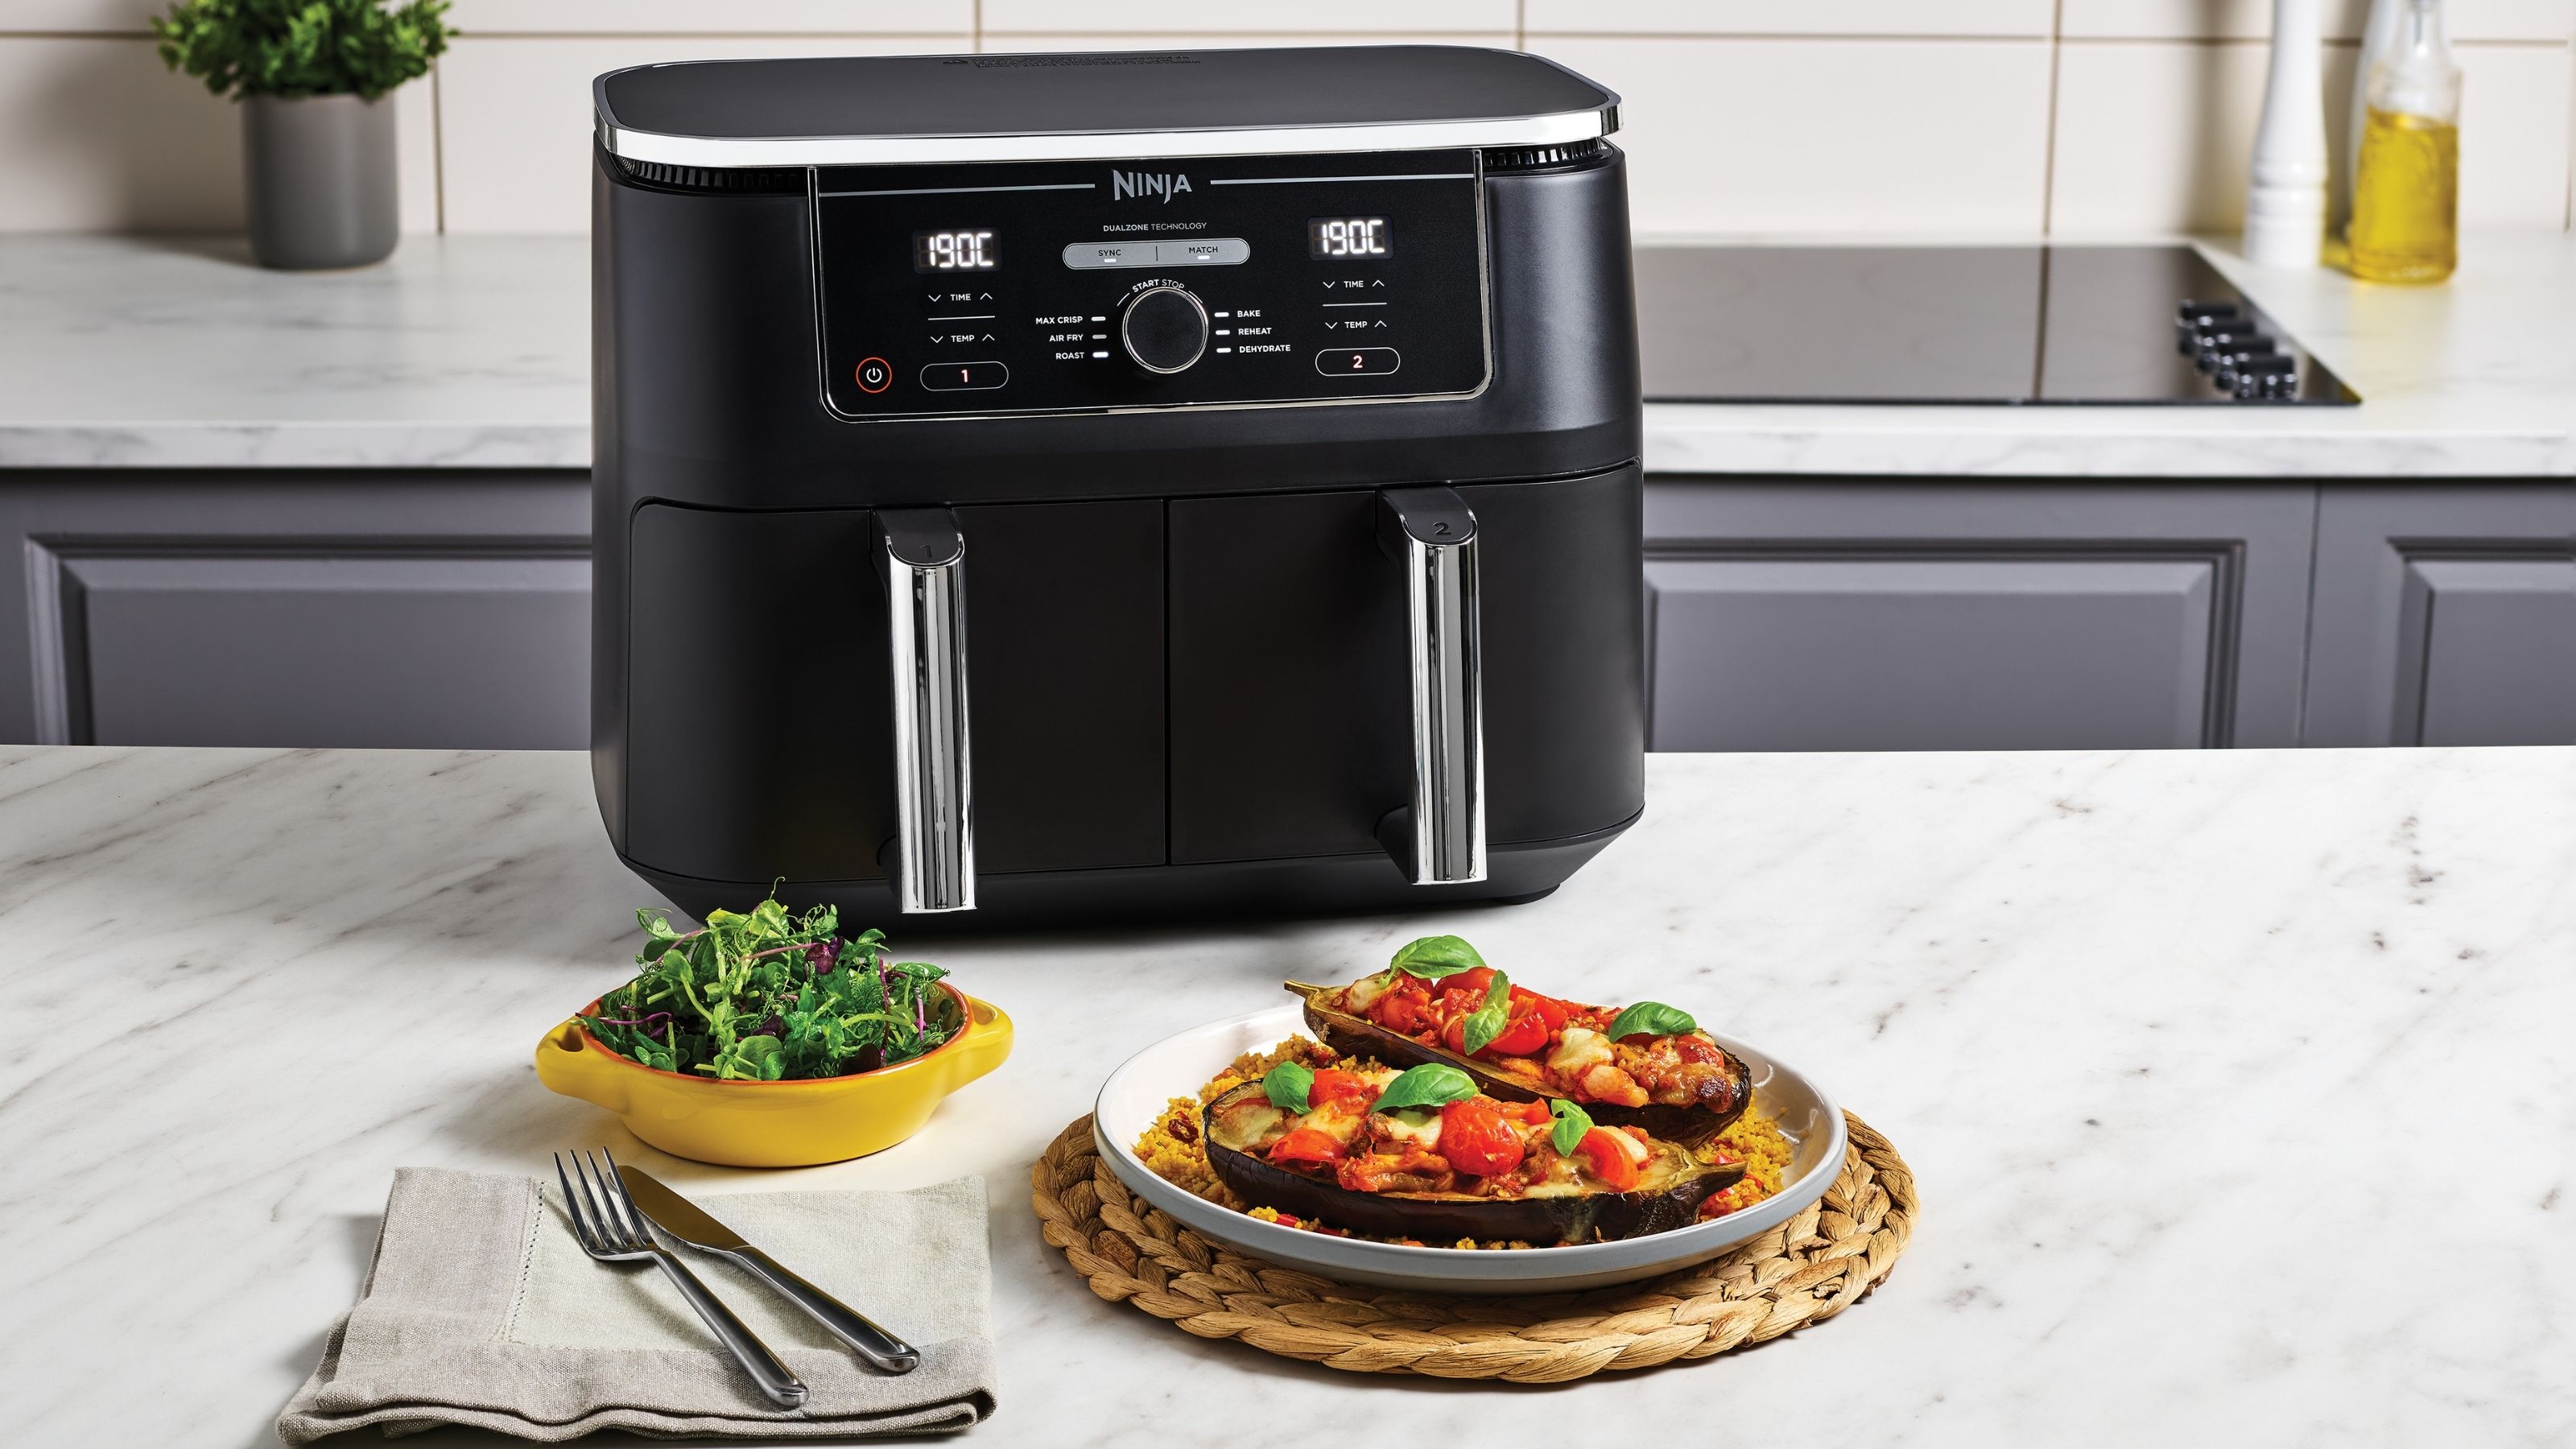 Airfryer Oven with Viewing Window Nonstick Basket Large Capacity Oilless Cooker with 100 Digital Cookbook Dishwasher Safe and a Stainless Finish One Touch Screen for 8 Presets Air Fryer XL 5.8QT 